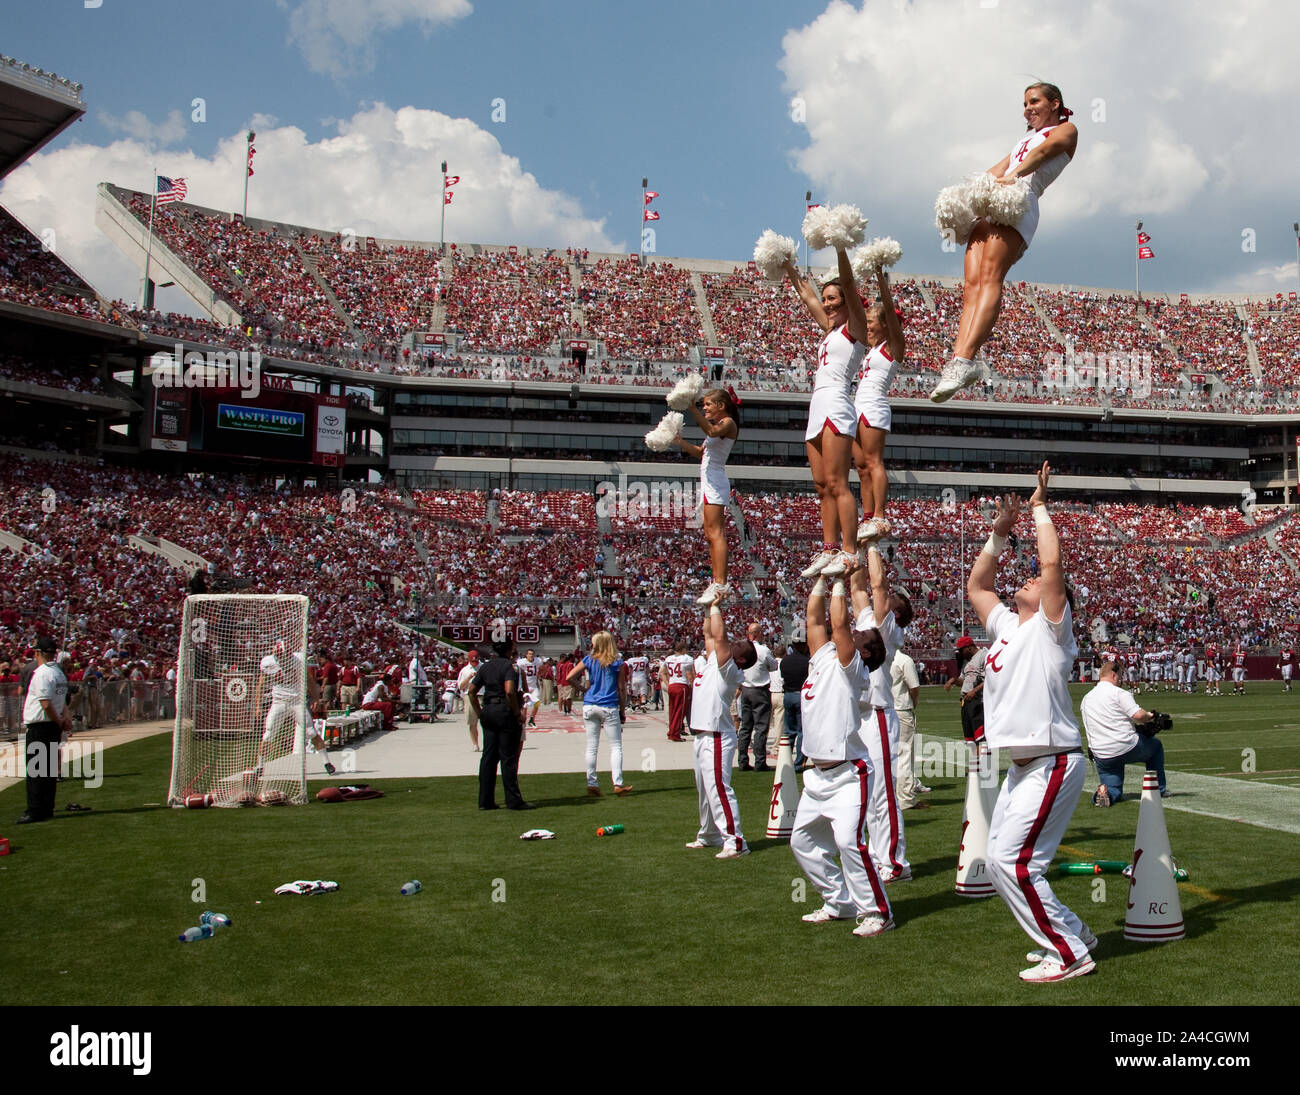 The cheerleaders are amazing to watch. The boys throw the girls into the air as they cheer on their winning team. University of Alabama football game, Tuscaloosa, Alabama Stock Photo